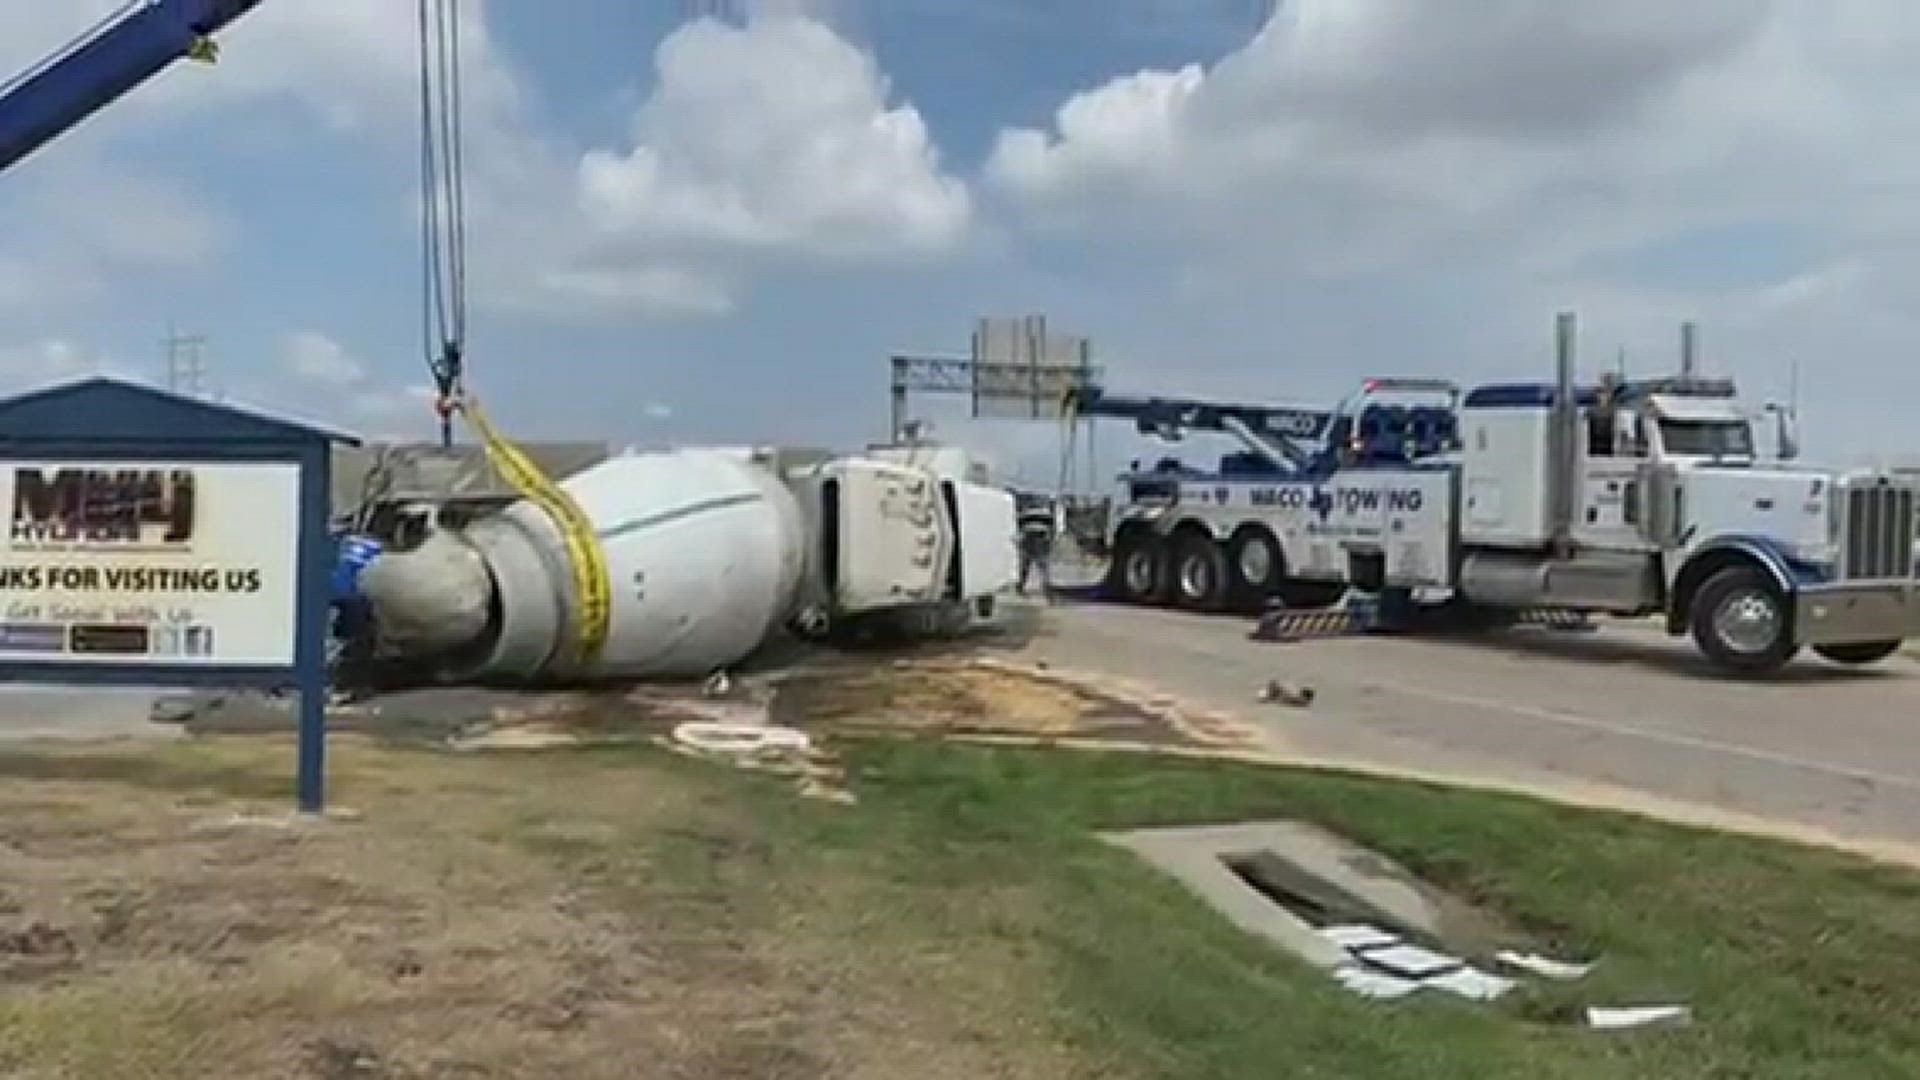 Around 10:30 a.m., the Waco Fire Department tweeted about the incident, saying the truck overturned in the 1500 block of W. Loop 340
Credit: Rocky Bridges